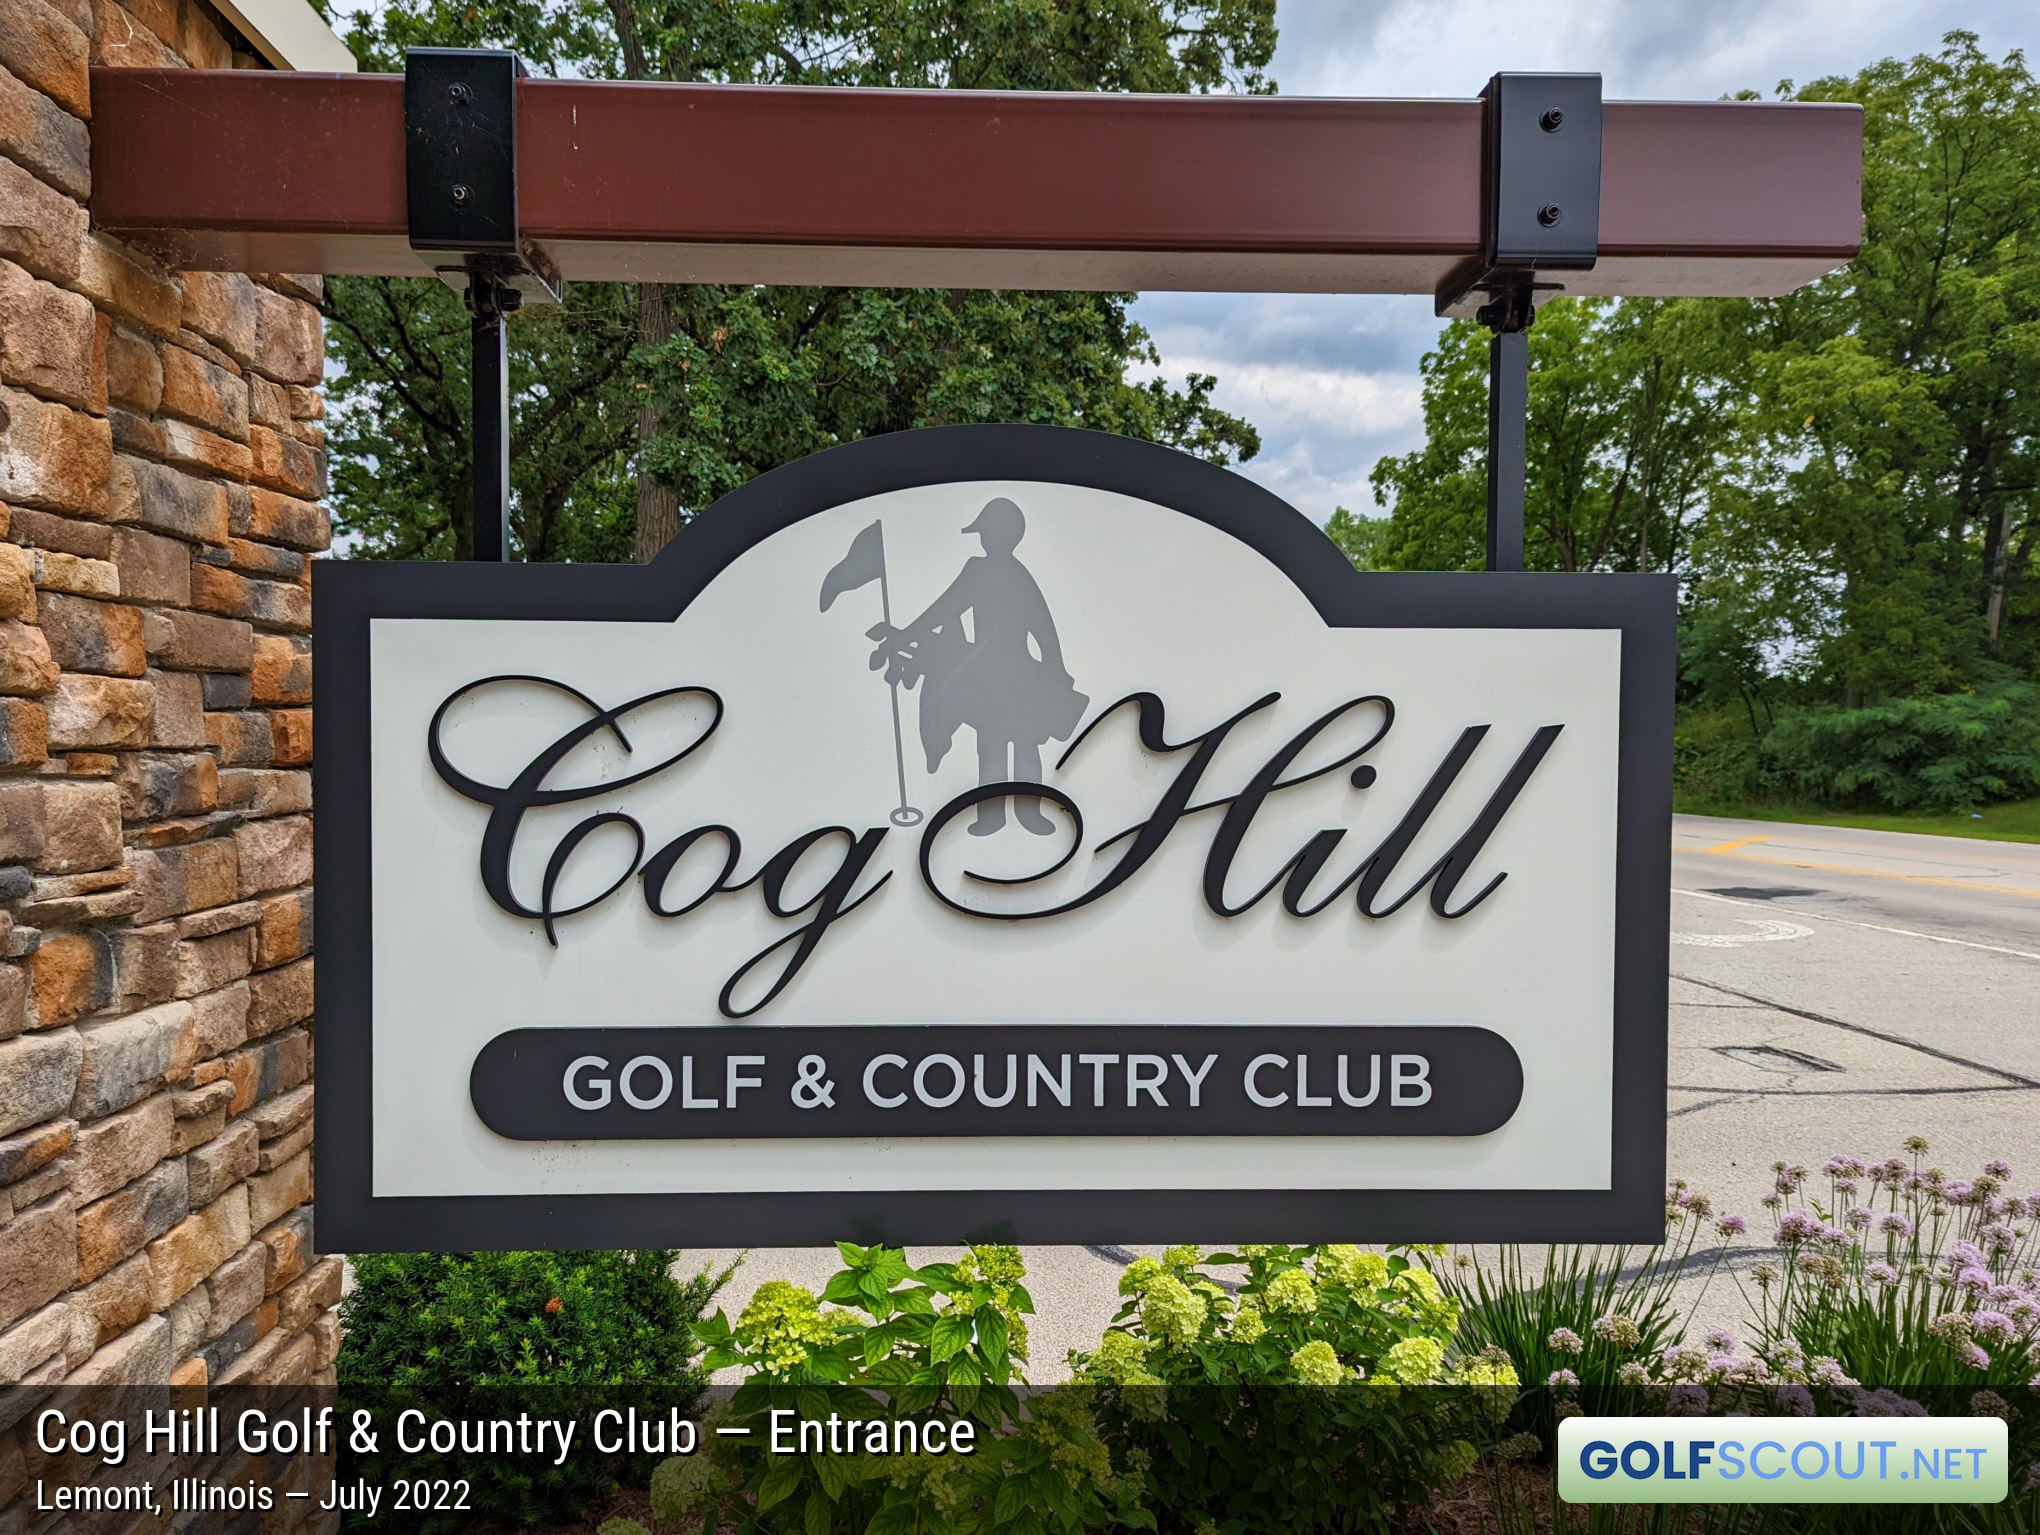 Sign at the entrance to Cog Hill Course #1